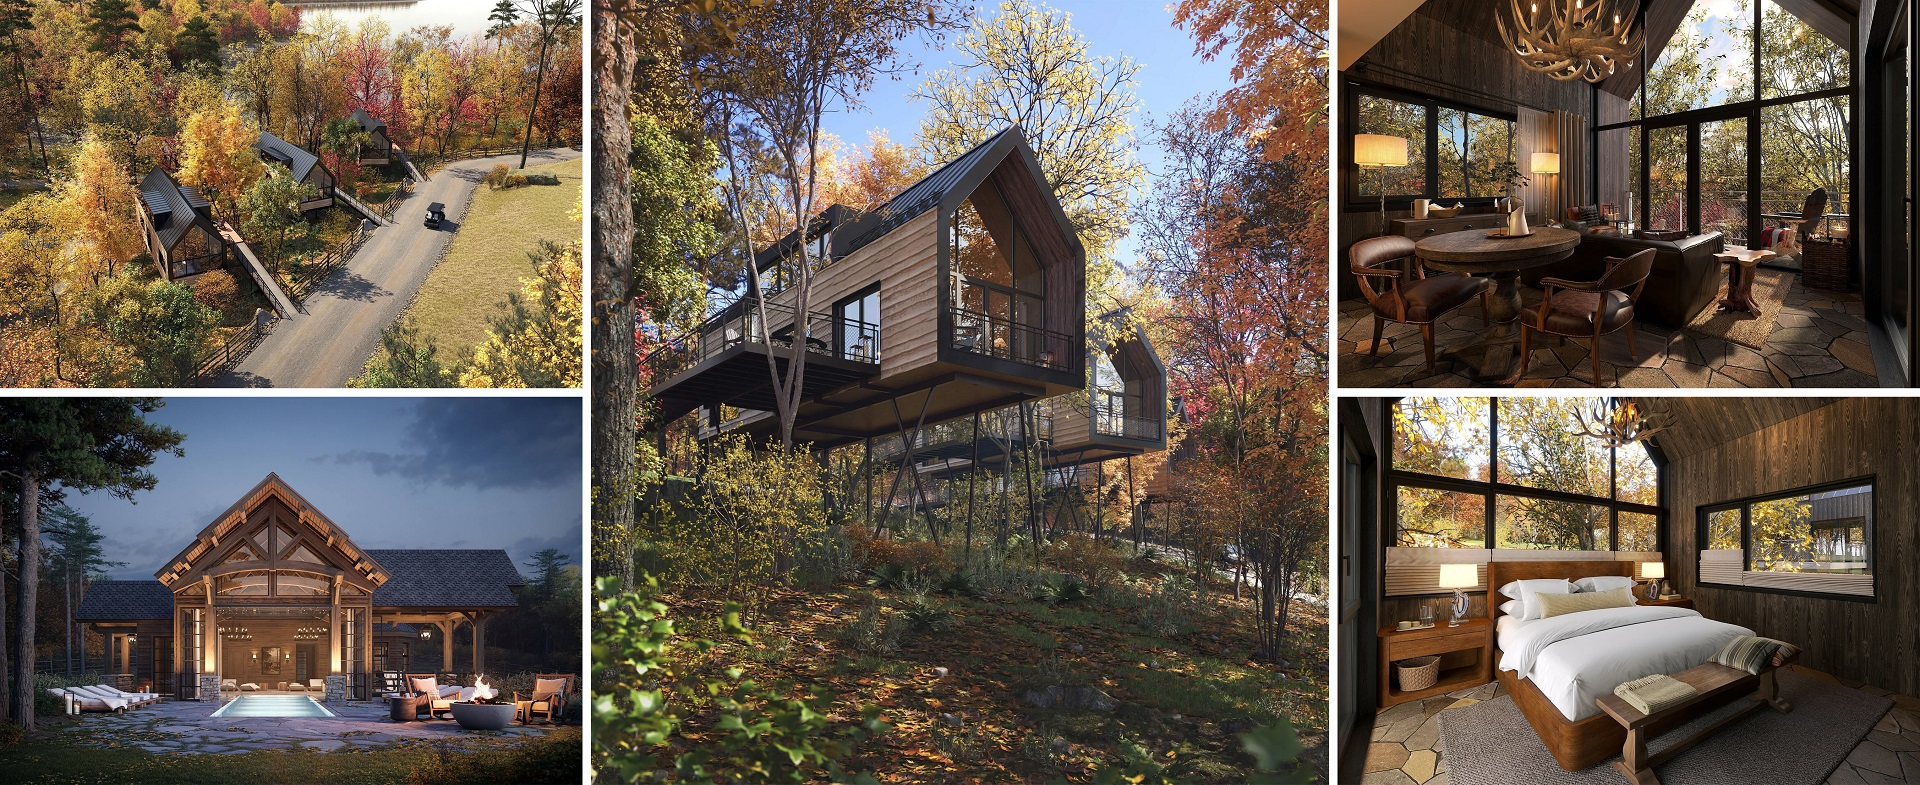 Glamping Lodges CGI for Hyatt: Projects Results